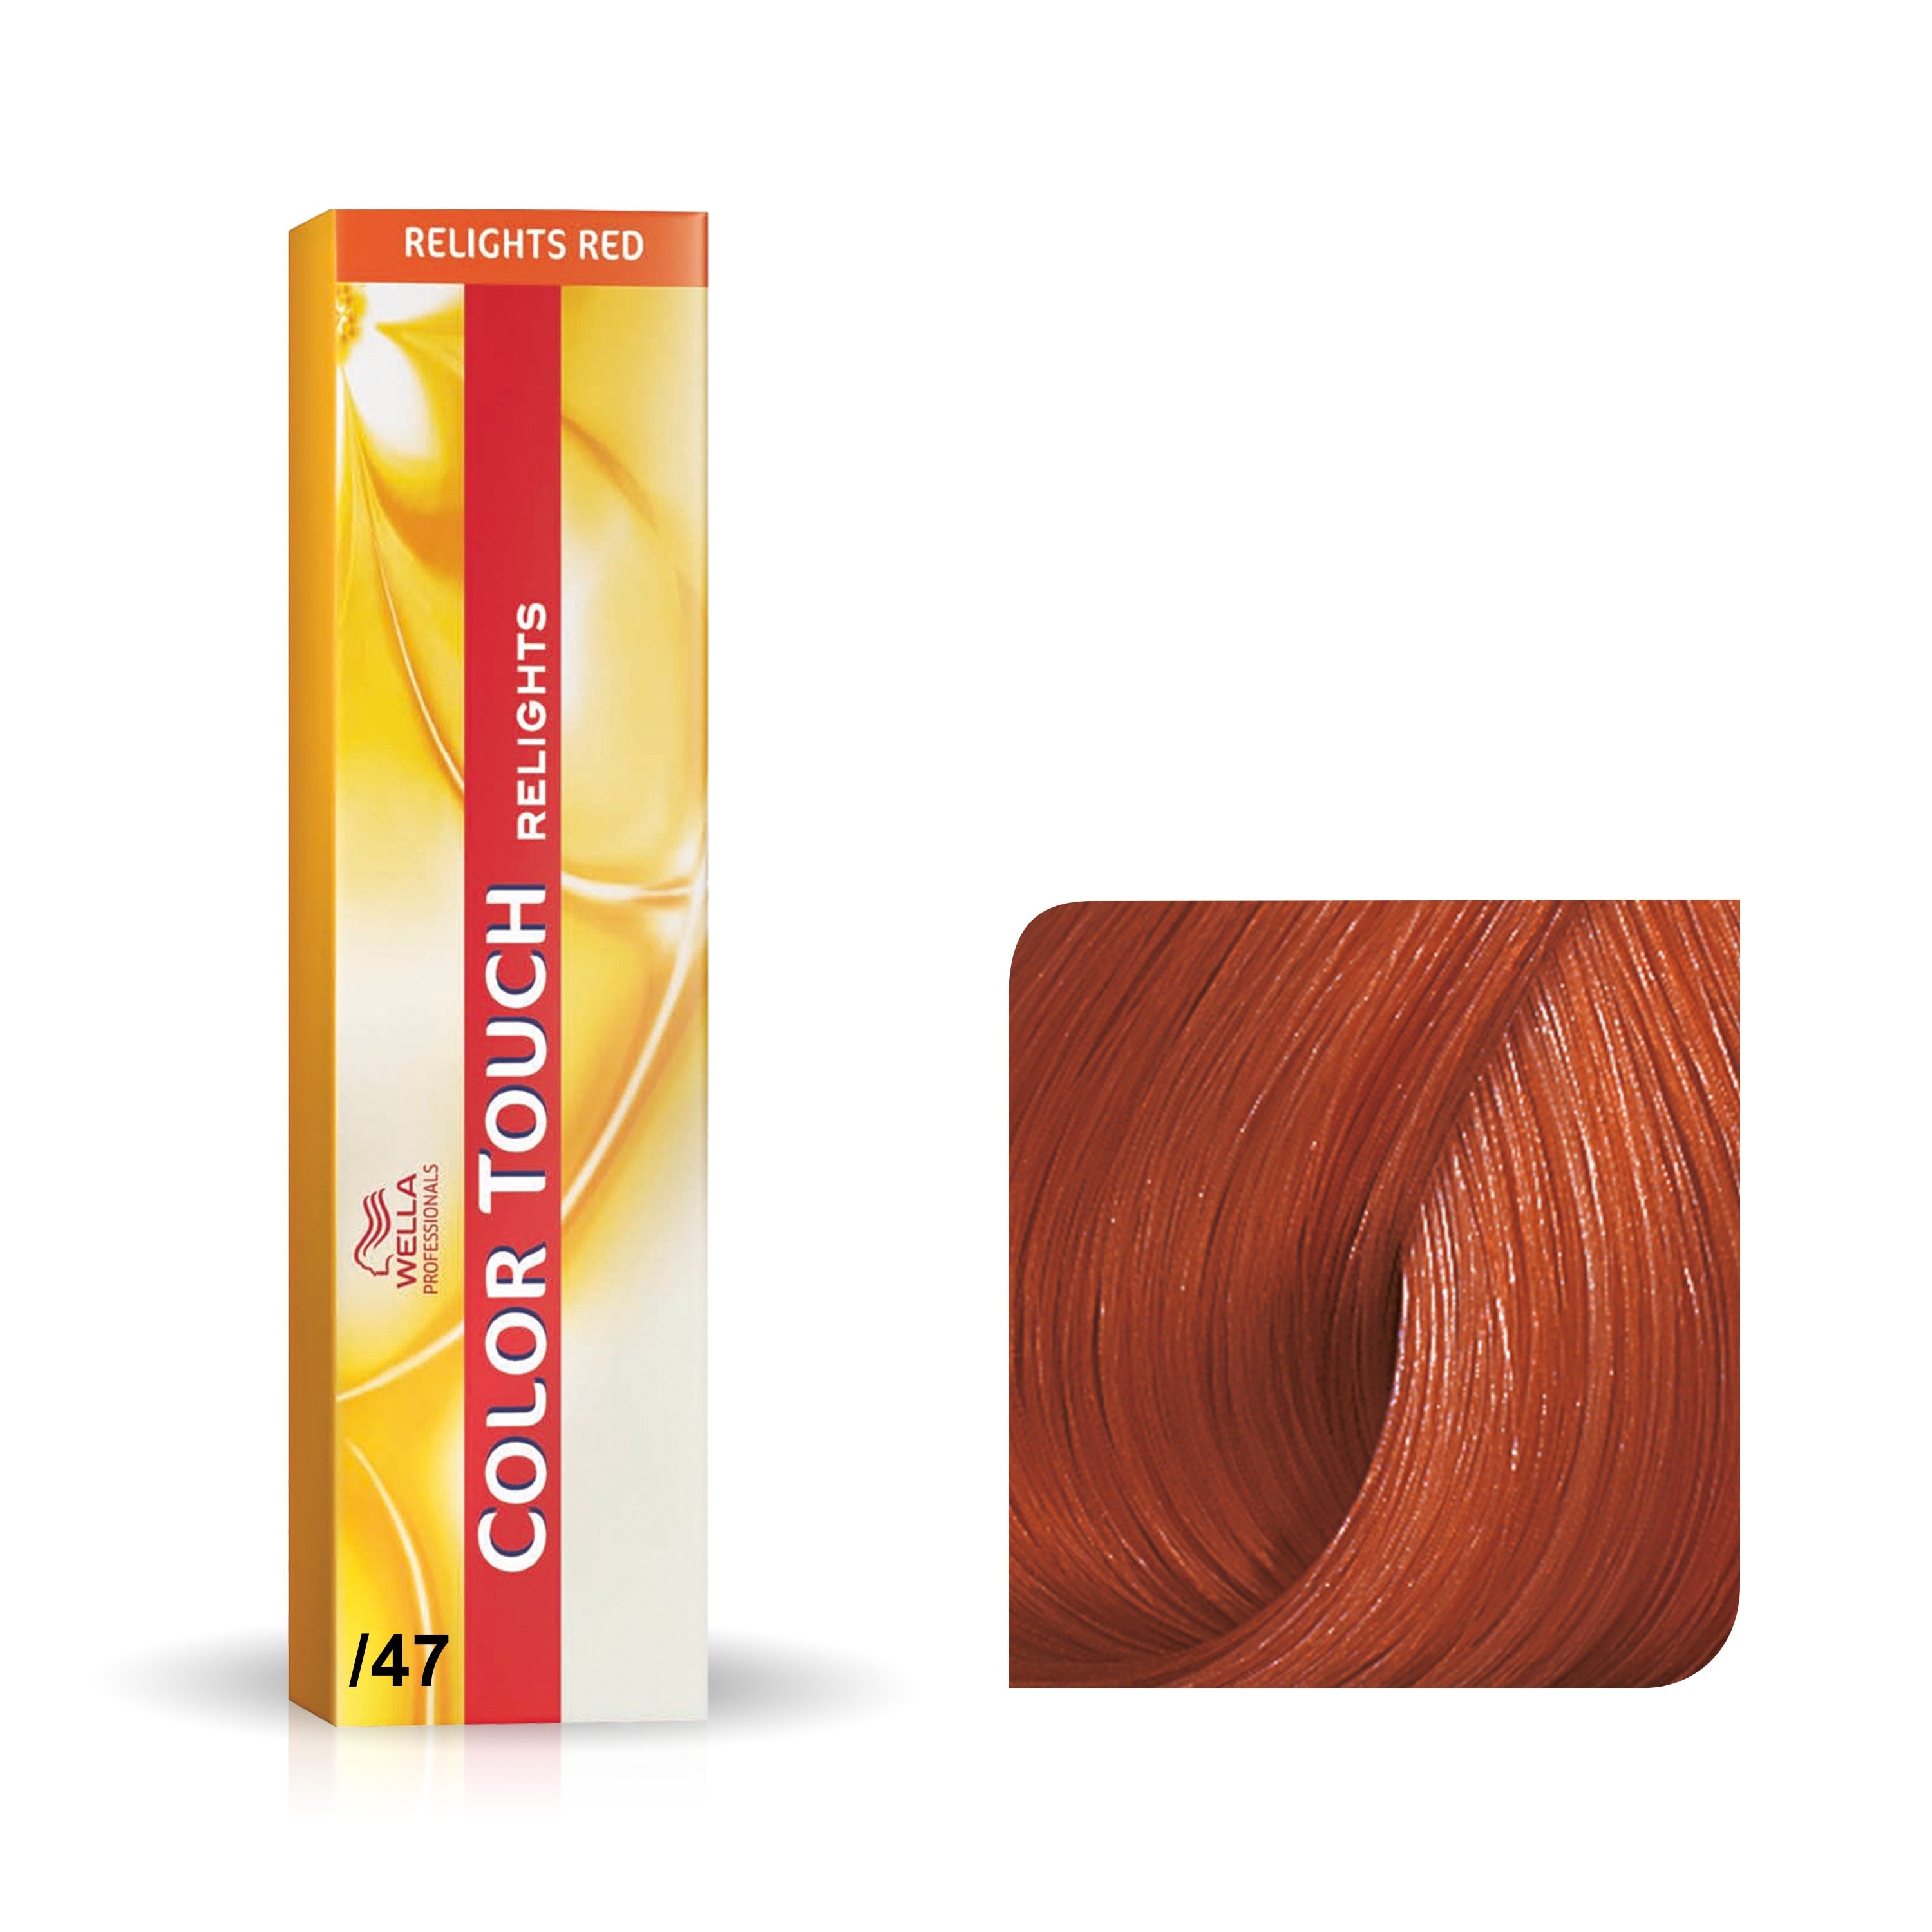 a tube of hair color next to a box